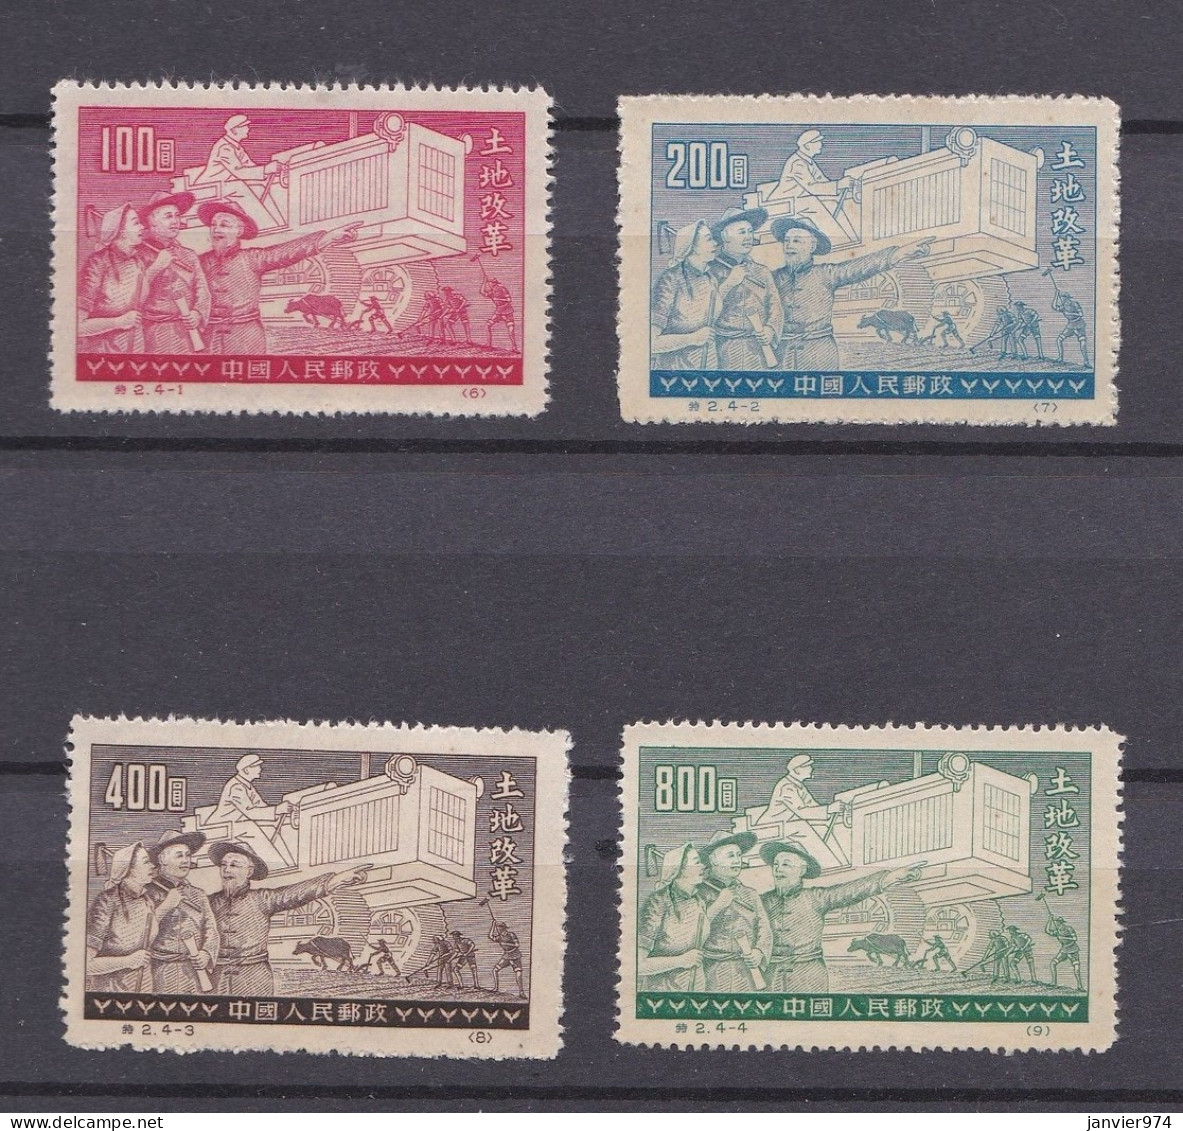 Chine 1952, Reforme Agricole, Serie Complète N° 133 à 136 , 4 Timbres Neufs, Scan Recto Verso - Ungebraucht